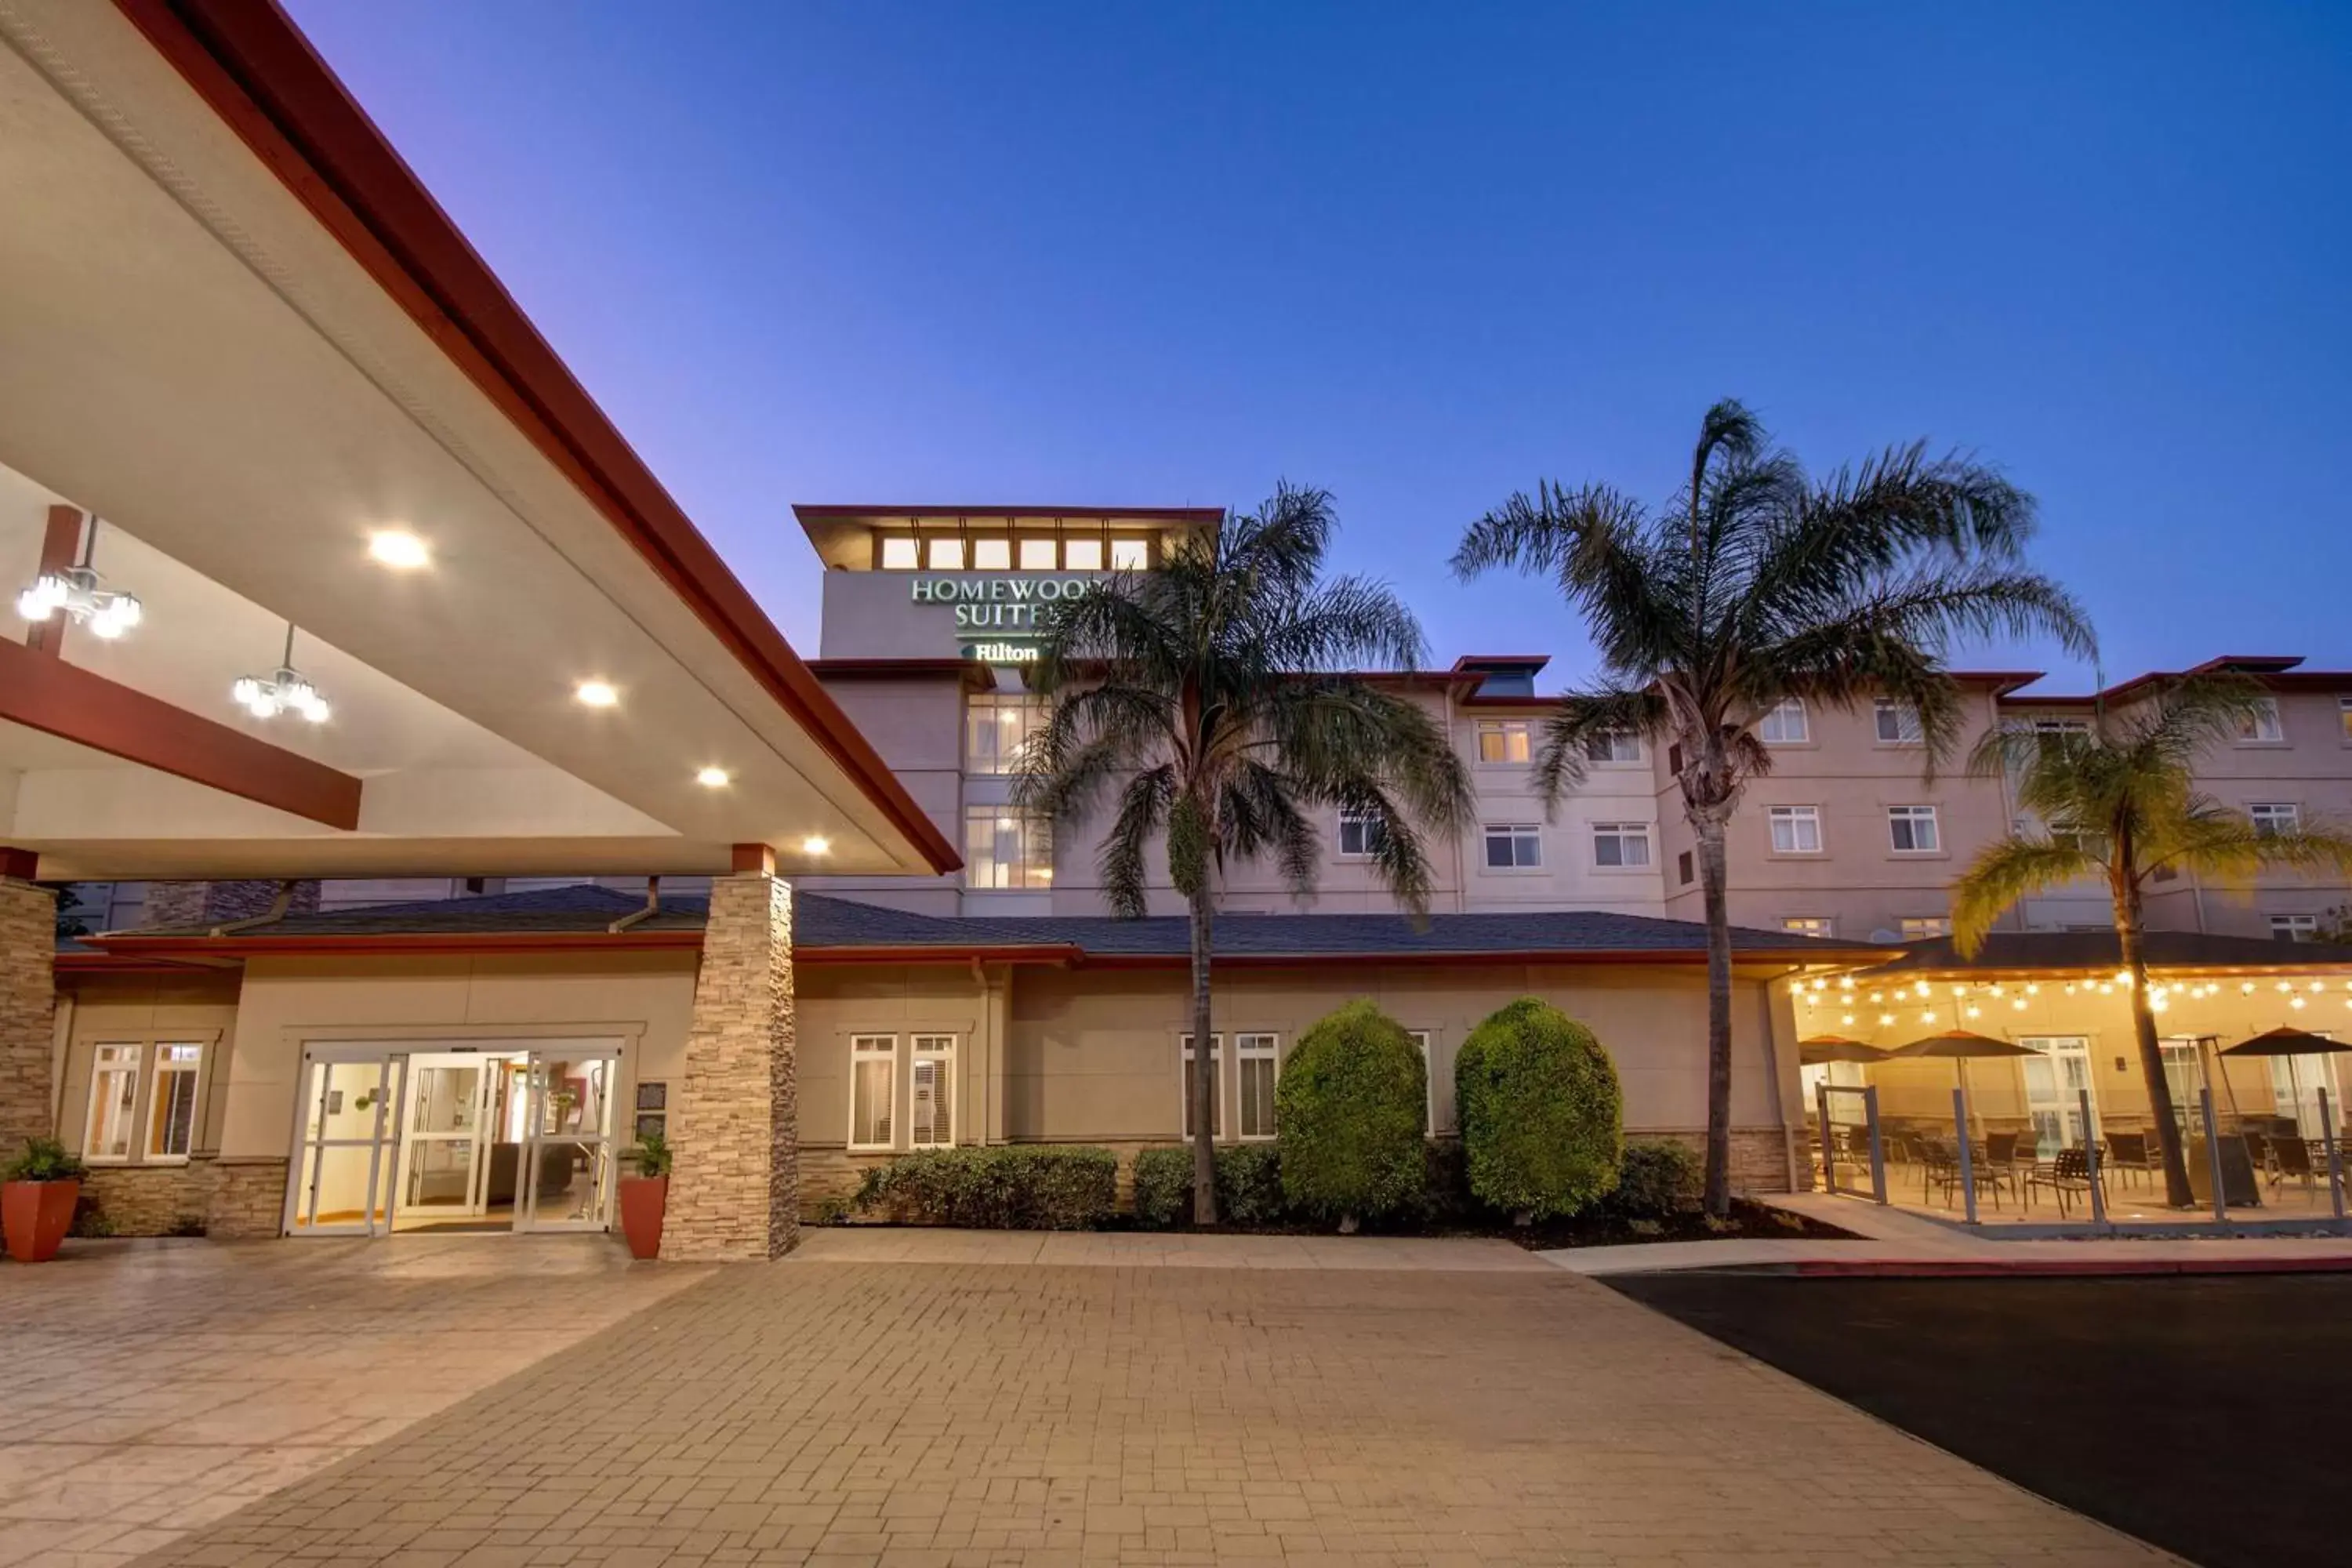 Property Building in Homewood Suites by Hilton San Francisco Airport North California